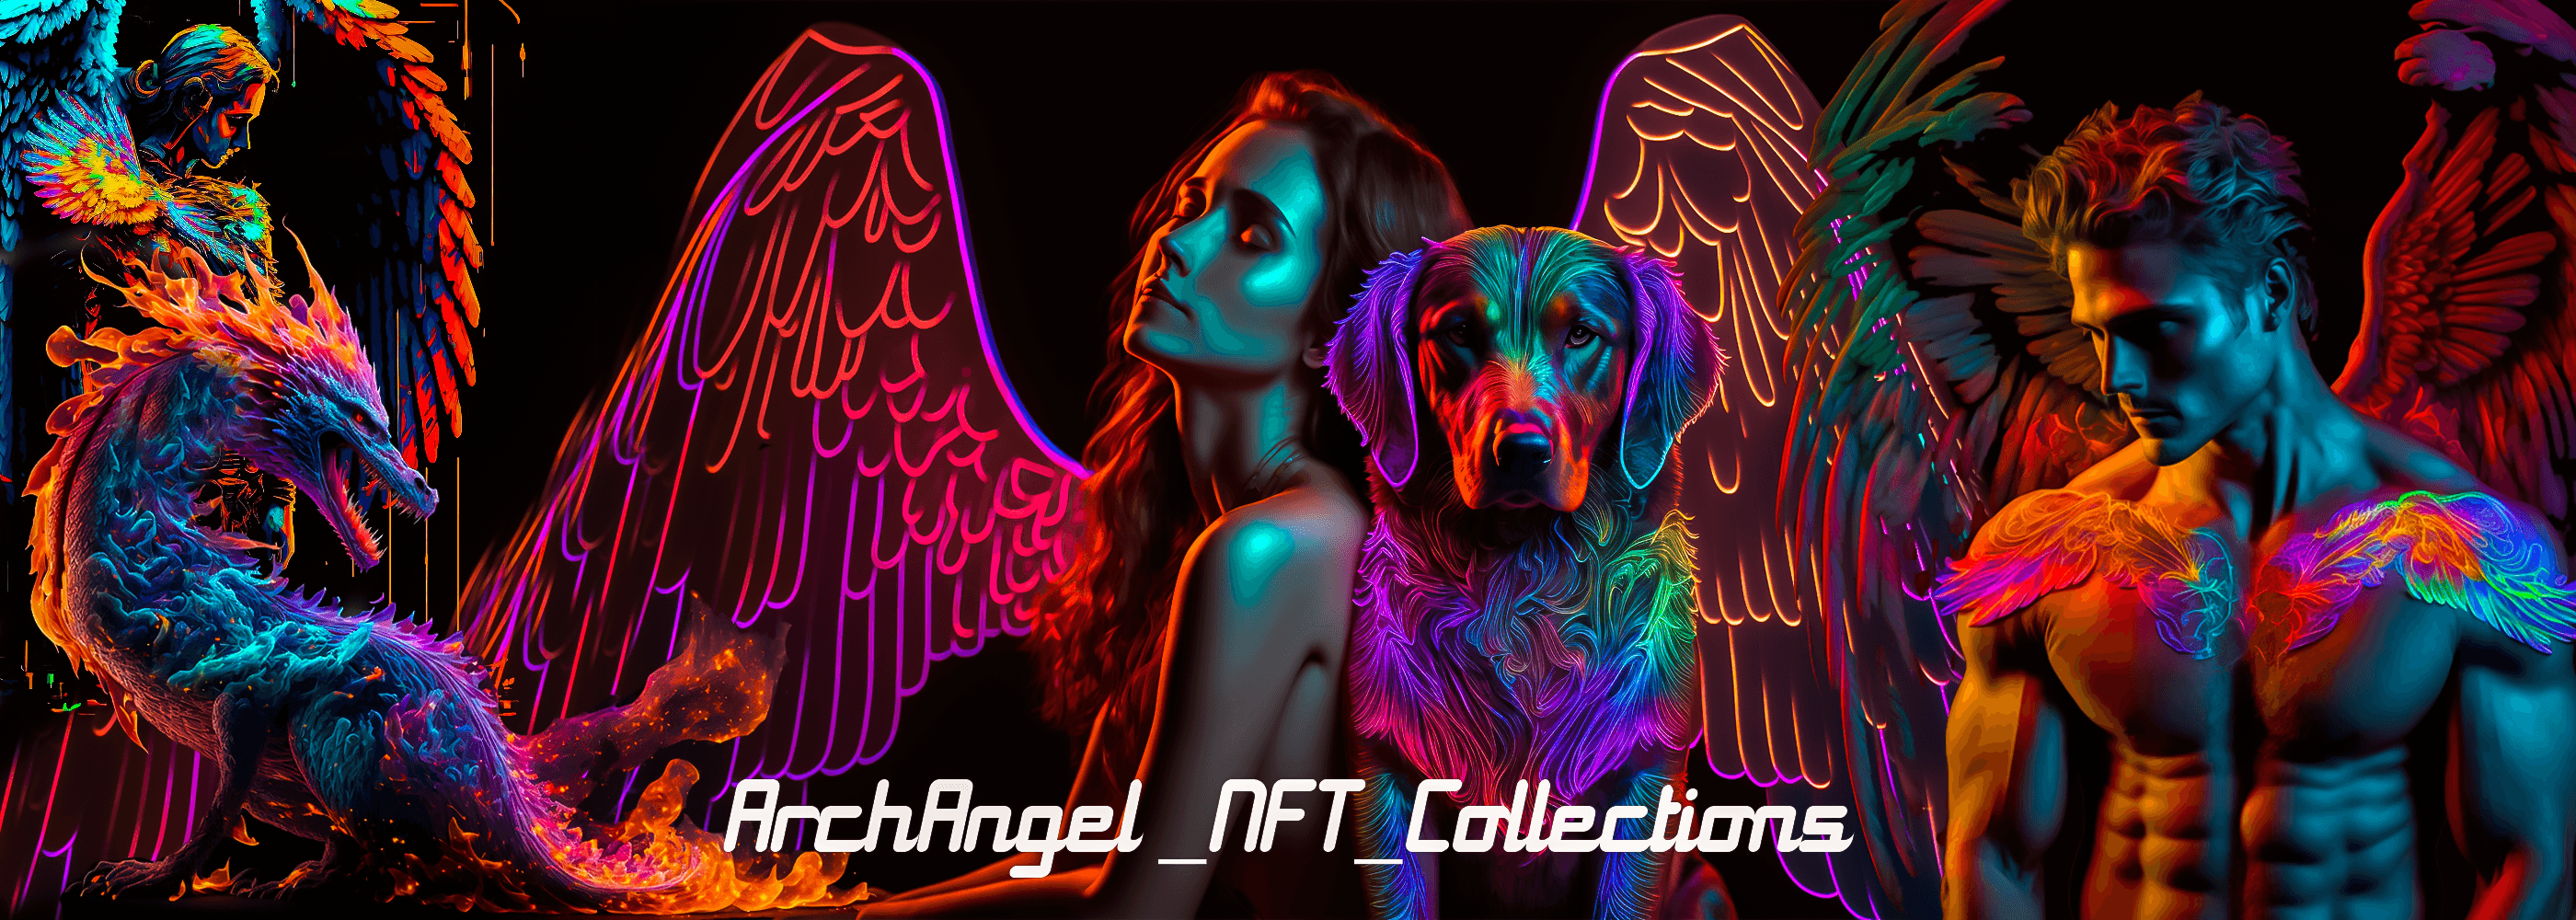 ArchAngel_NFT_Collections バナー